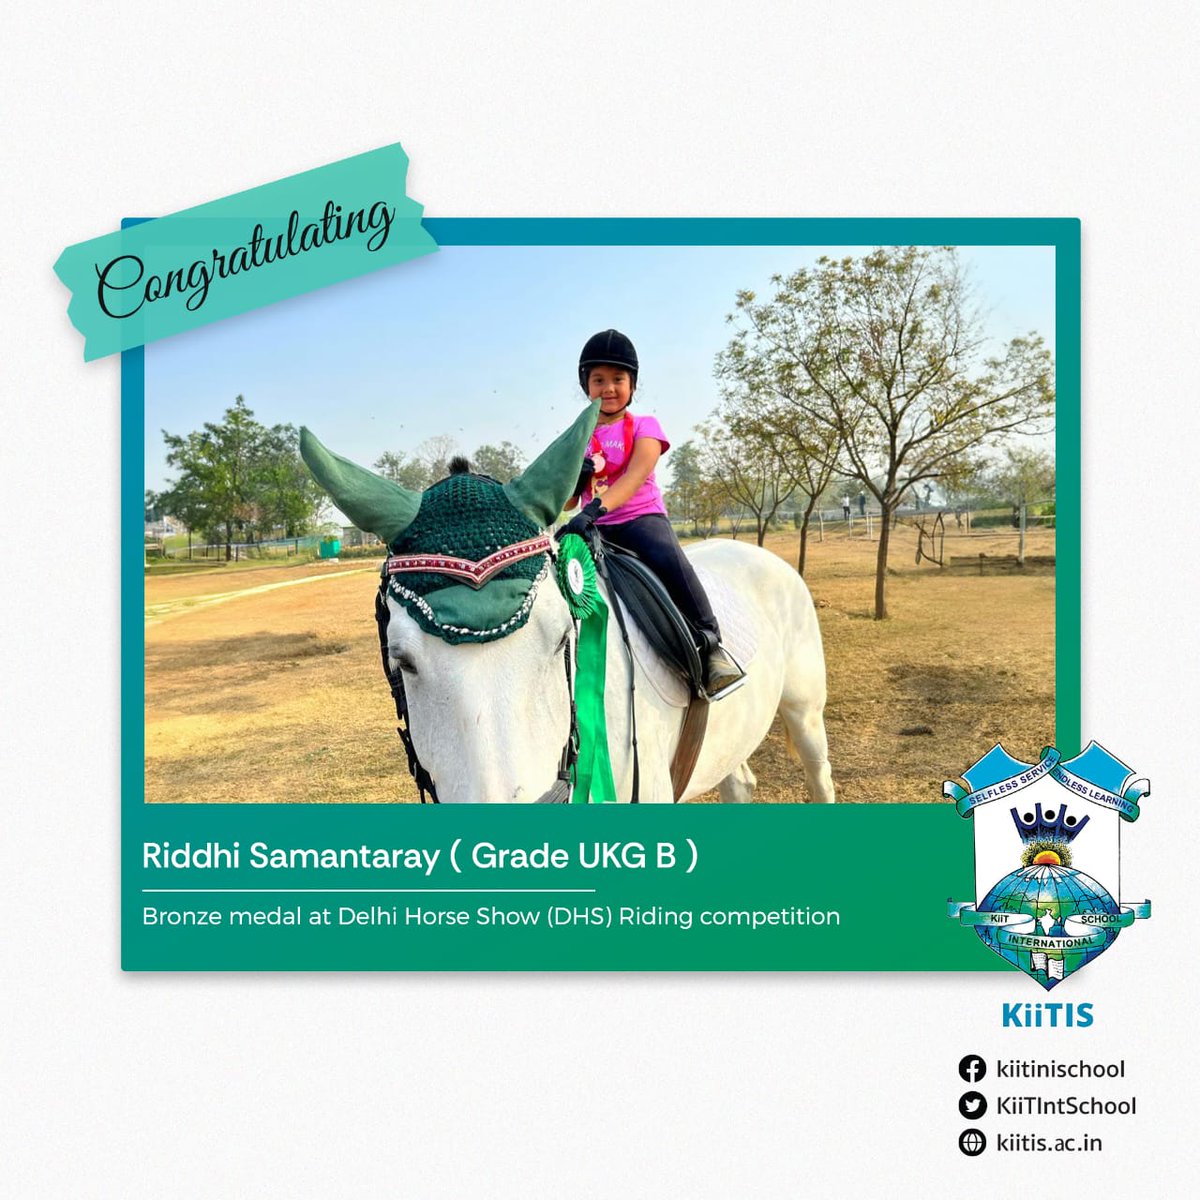 Riddhi's remarkable performance showcases her dedication and talent in equestrian sports, reflecting the spirit of excellence instilled at KiiTIS.

Congratulations, Riddhi, on this remarkable victory of yours!

#equestrian #bronzemedal #KiiTIS #Delhihorseshow